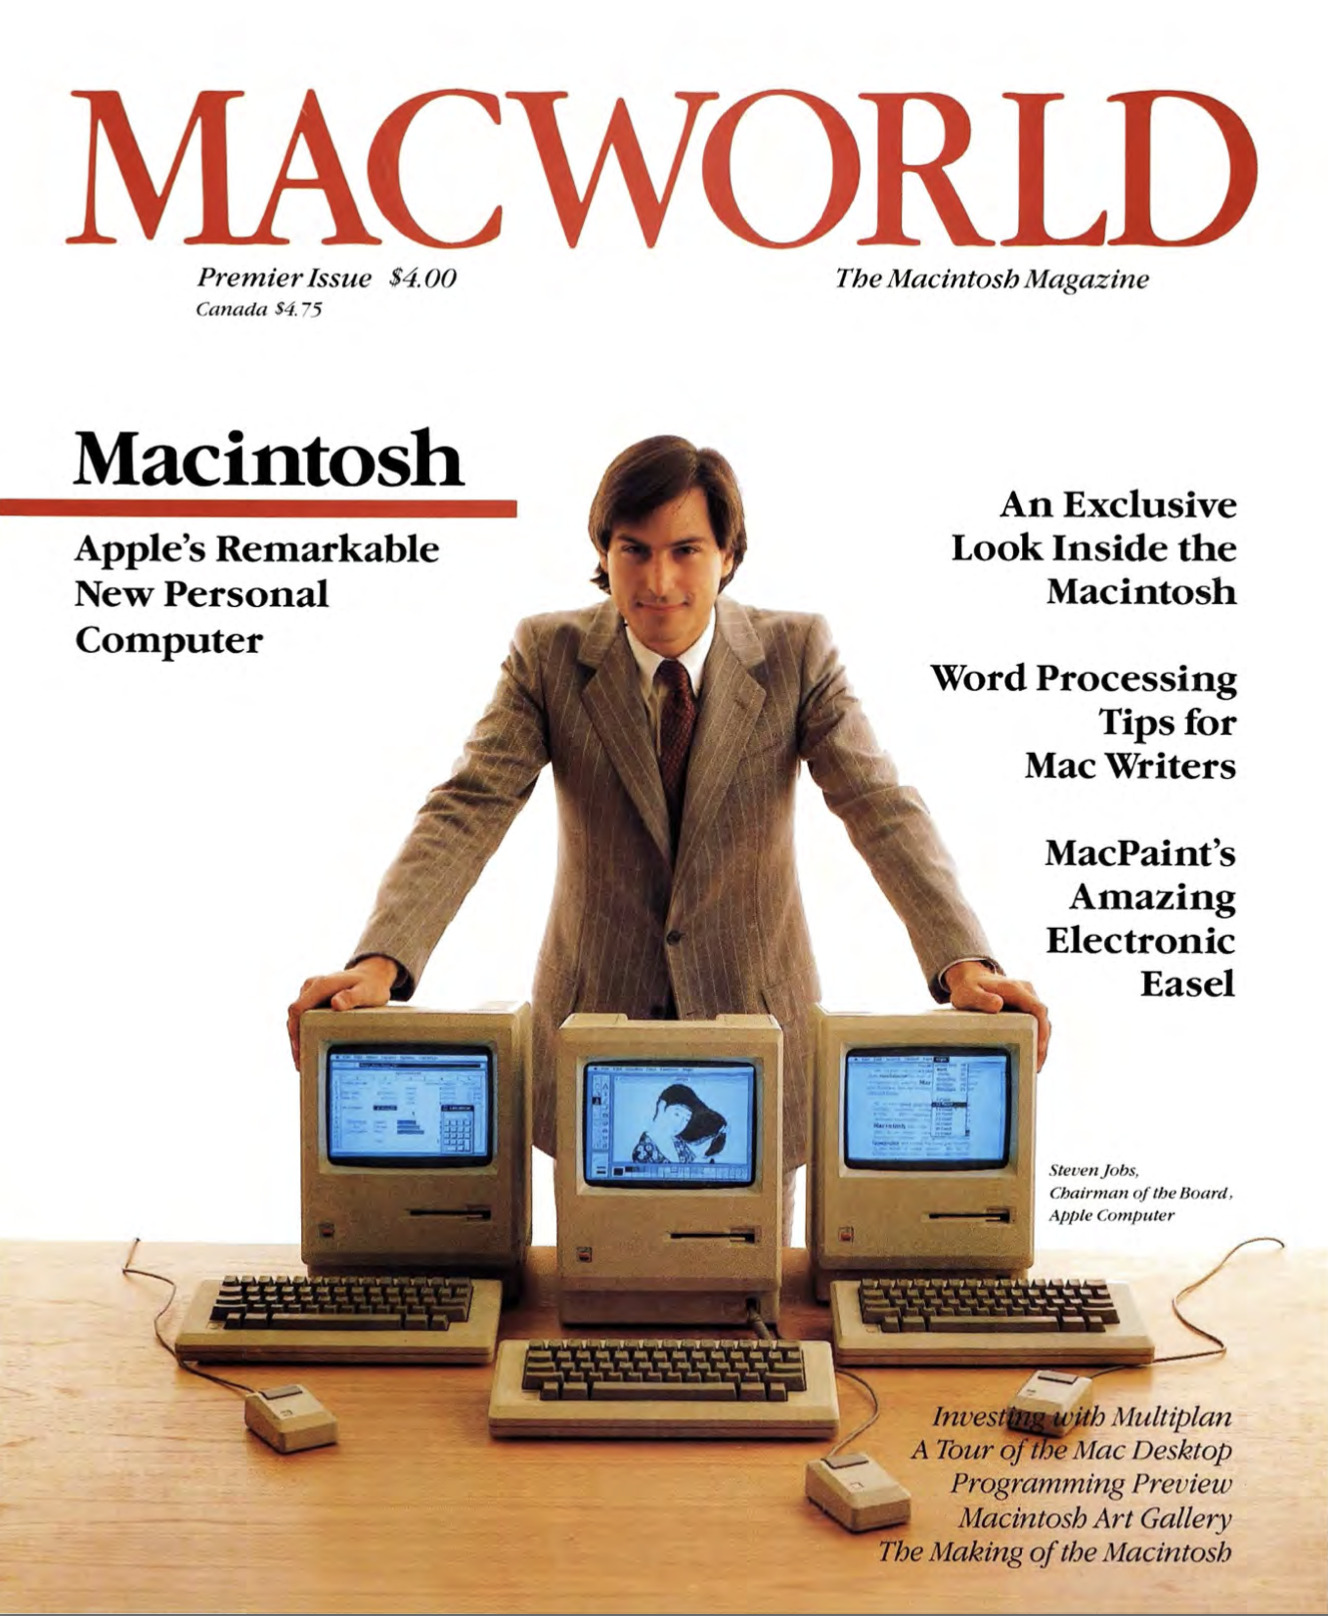 Macworld first issue cover